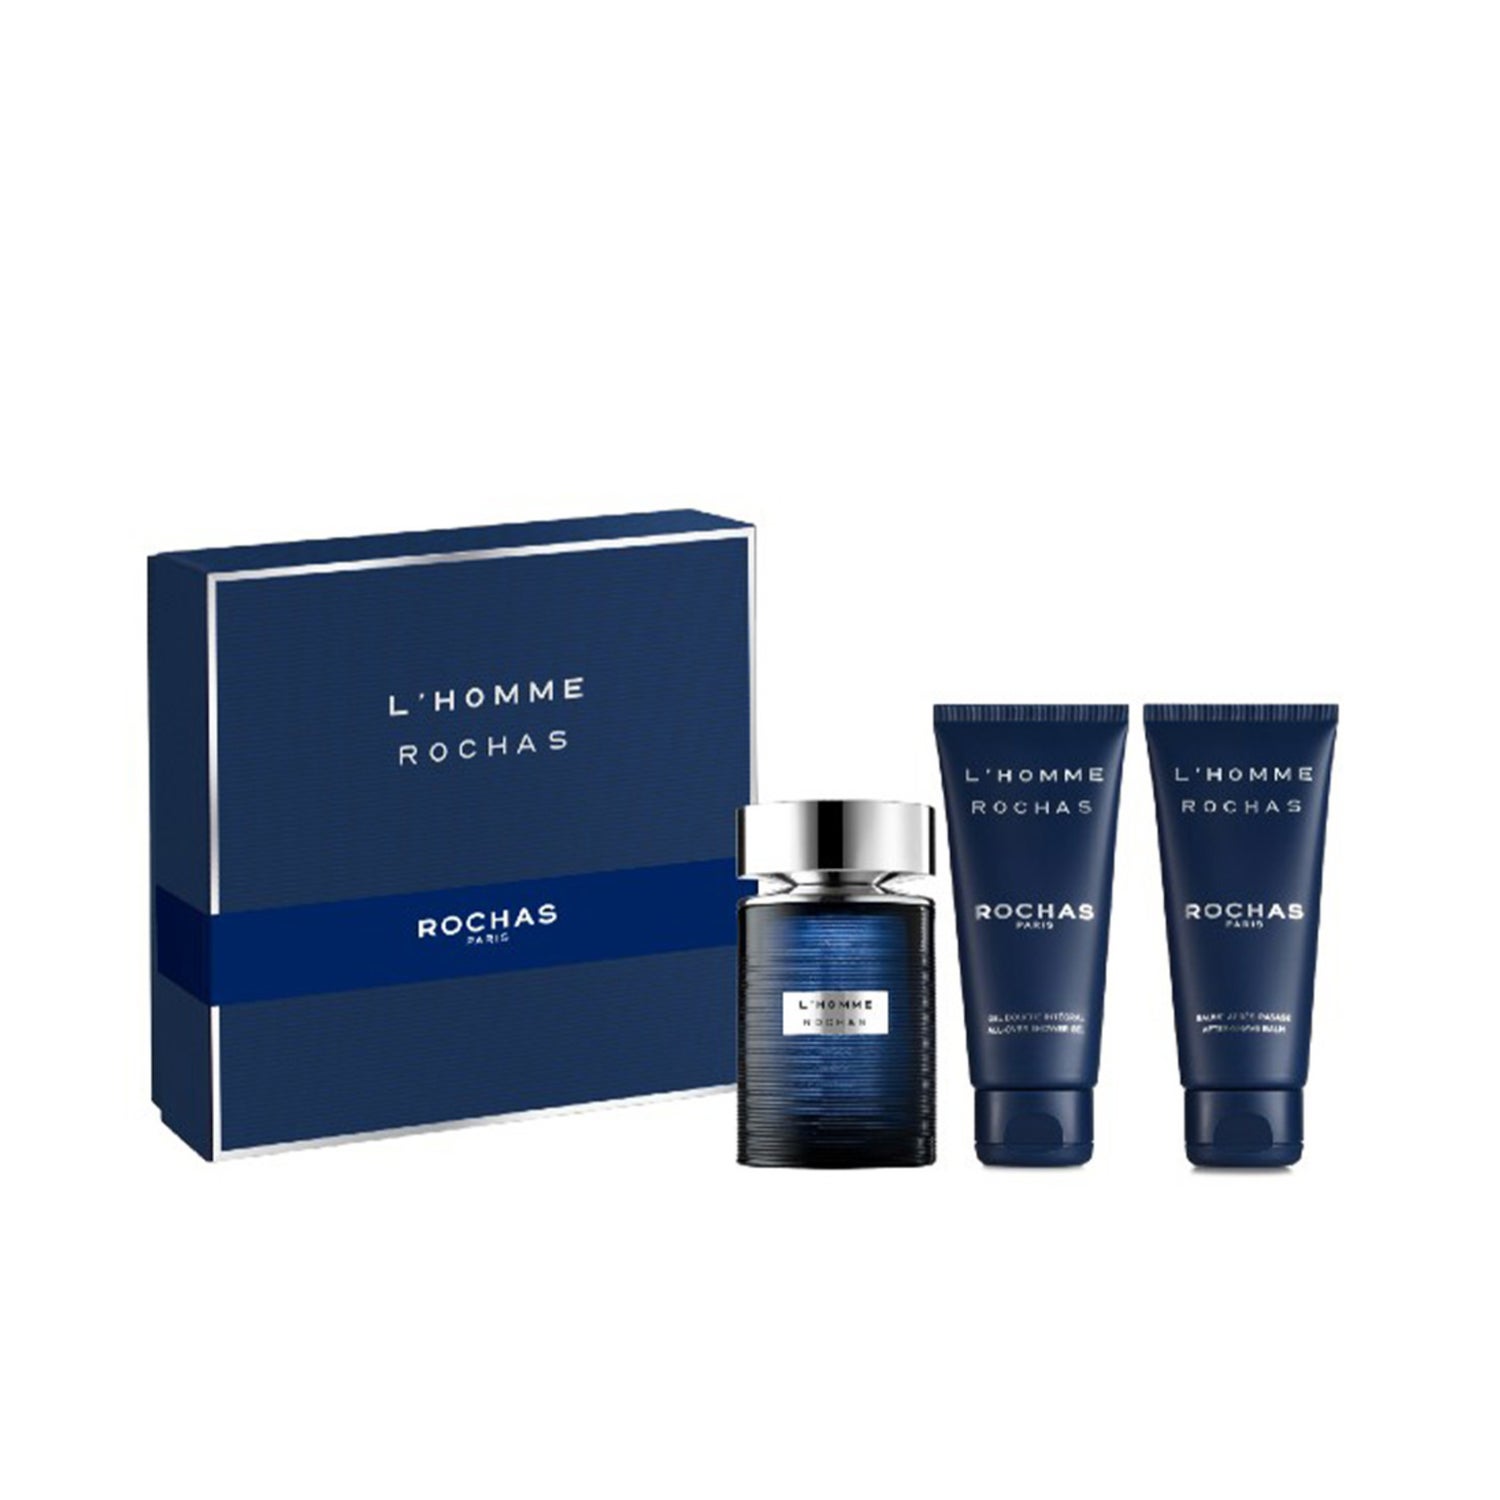 Rochas l'homme m EDT 60.0ml. Rochas l'homme 5ml. Rochas homme